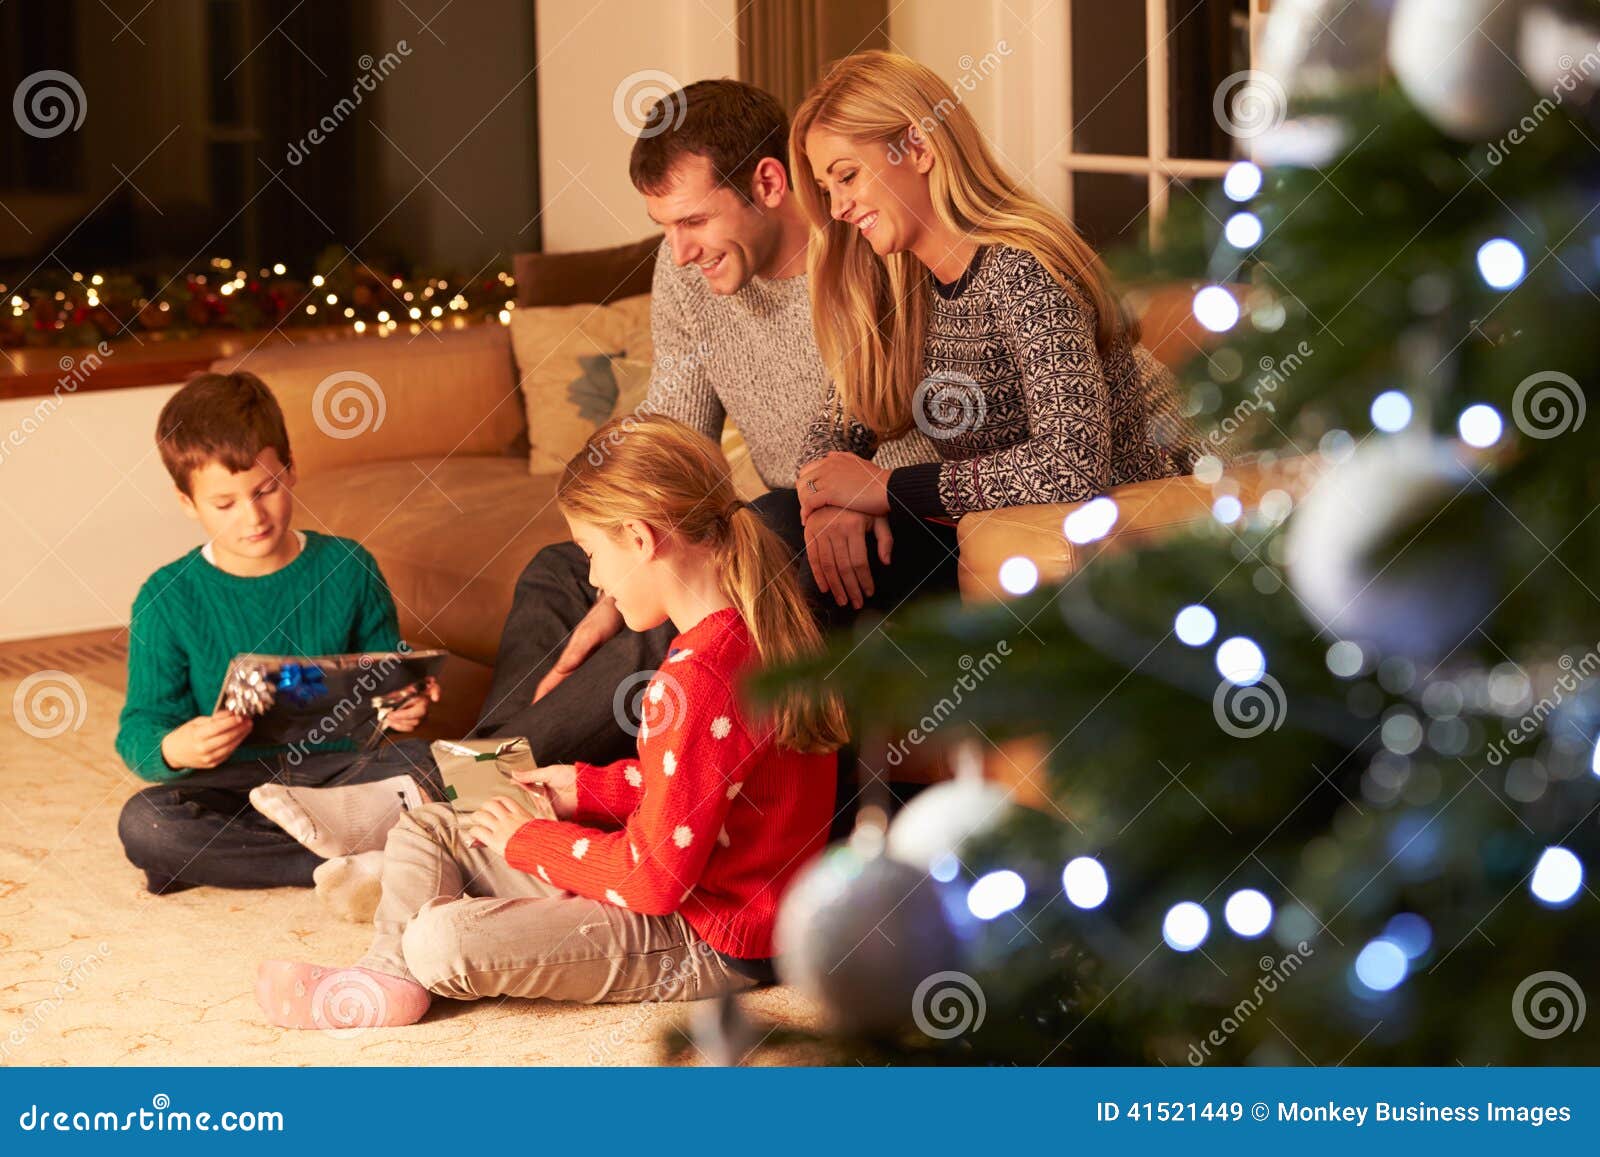 family unwrapping gifts by christmas tree